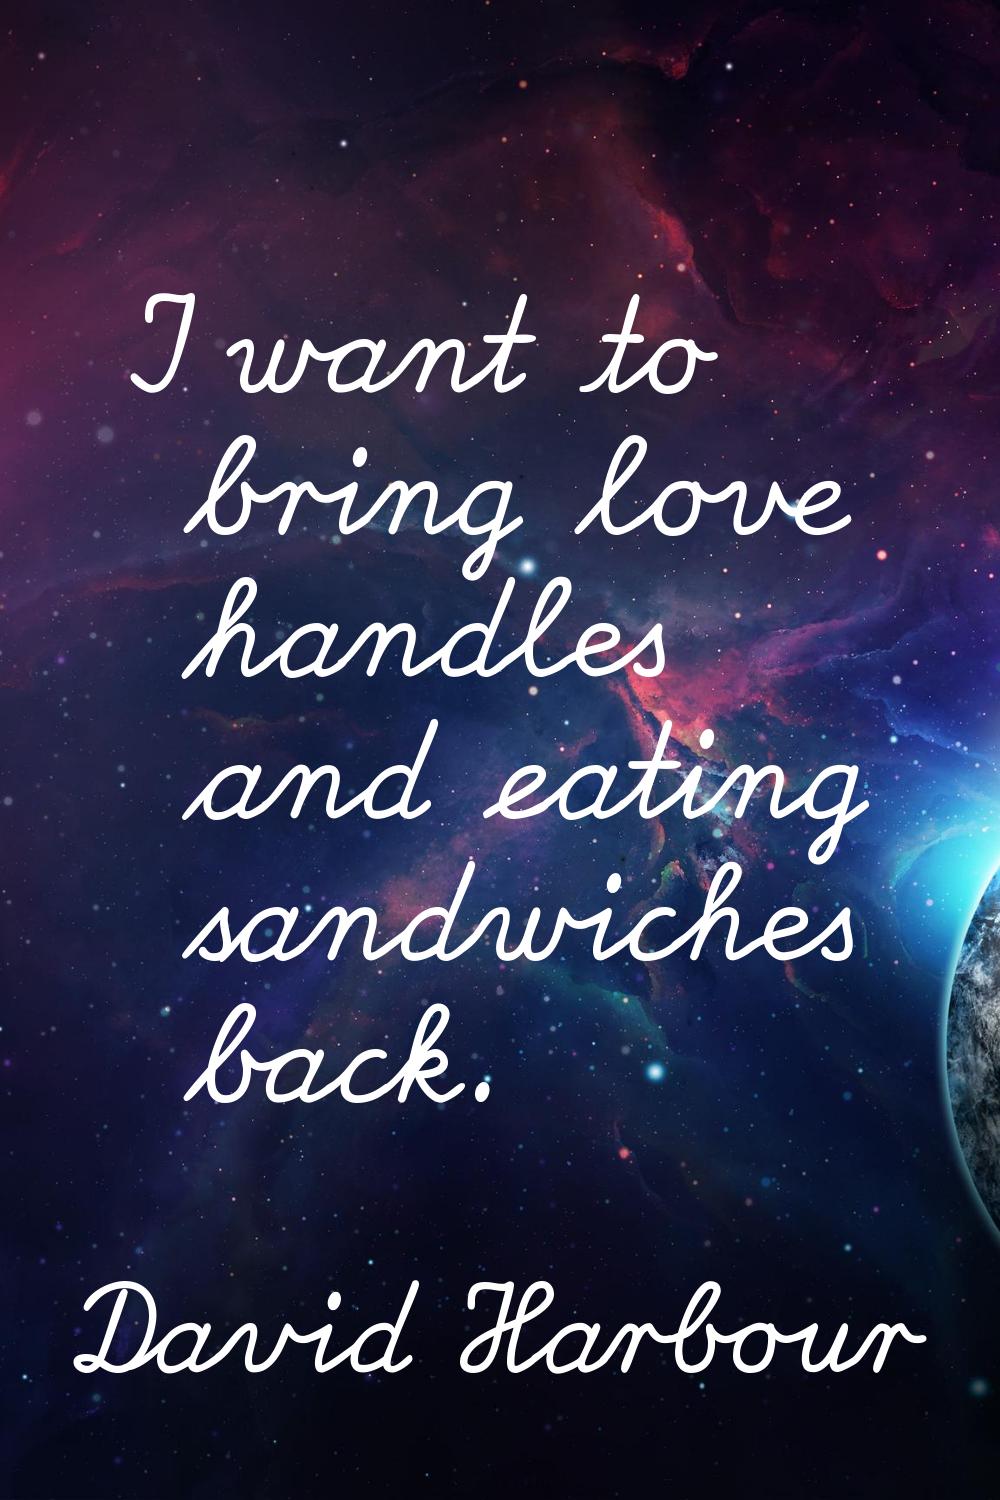 I want to bring love handles and eating sandwiches back.